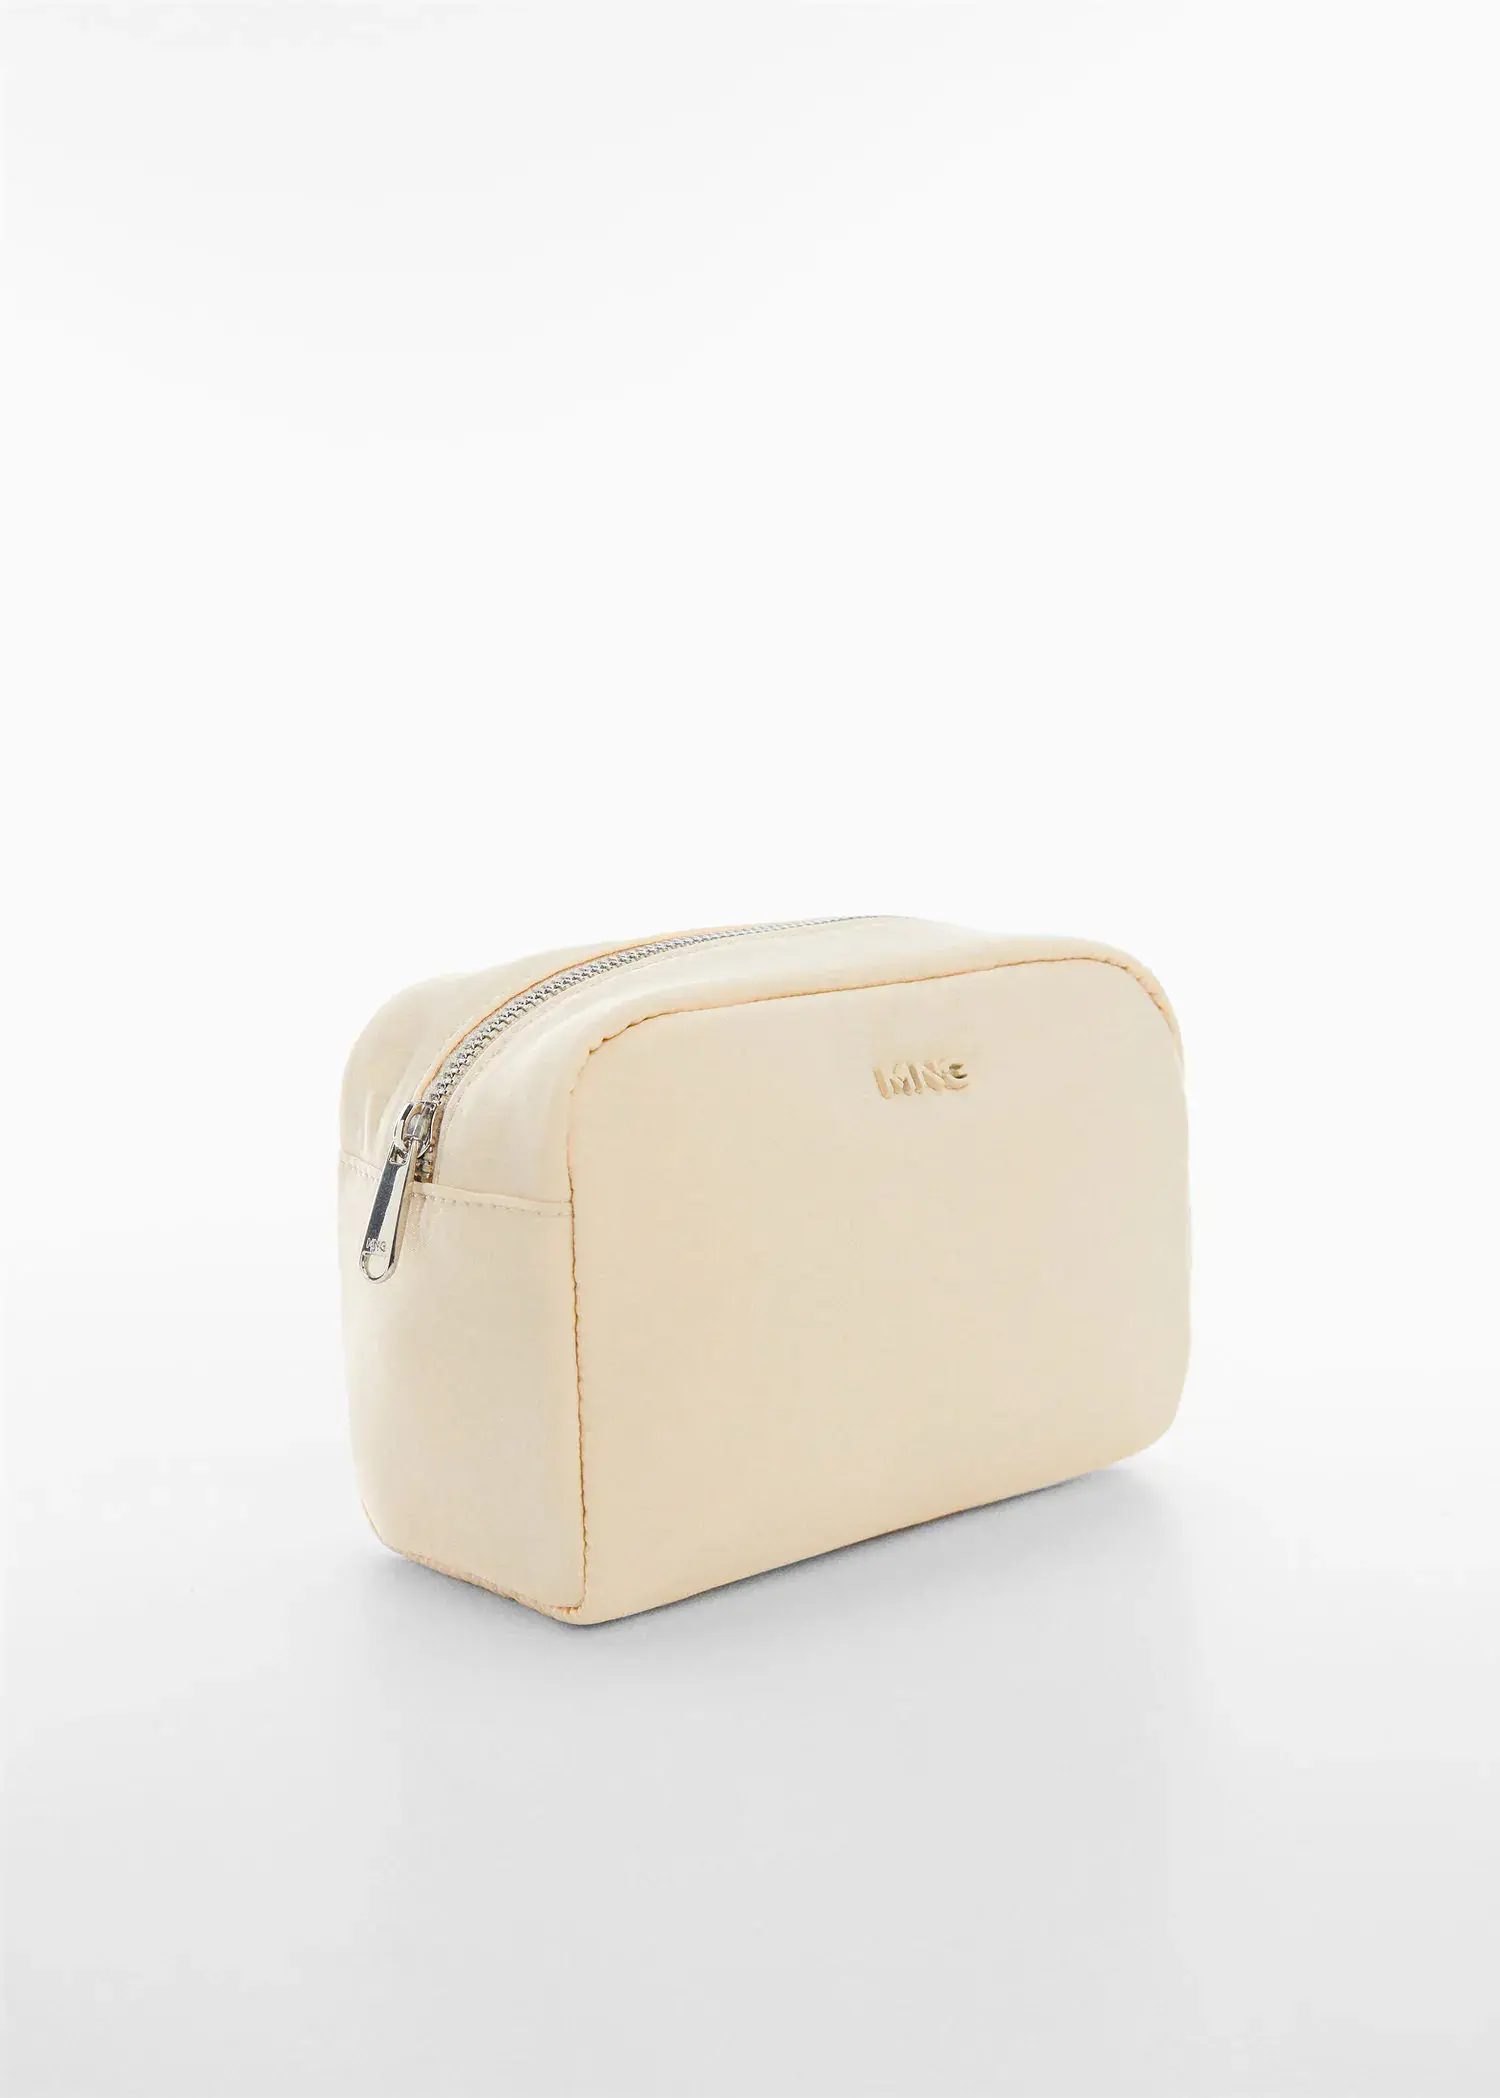 Mango Zipped toiletry bag with logo. a white bag sitting on top of a white table. 